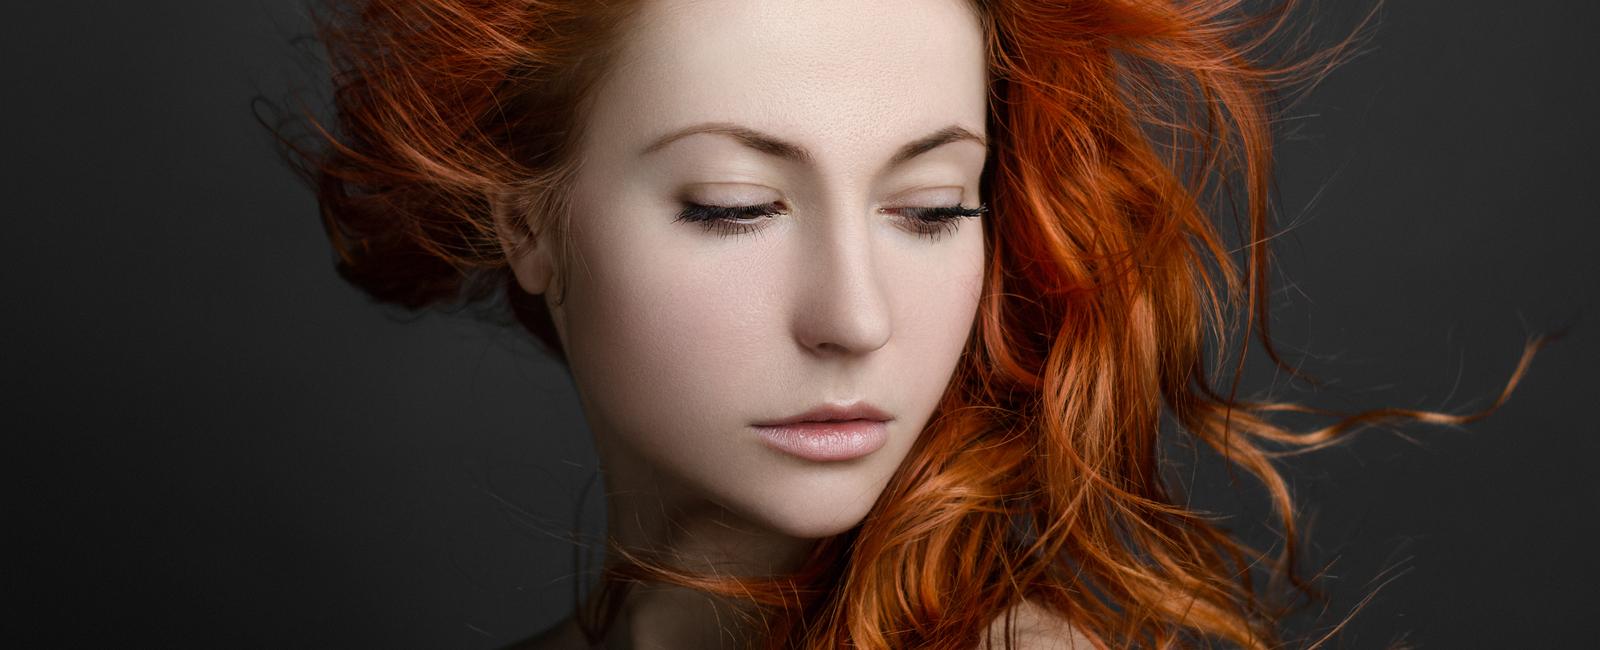 On average redheads have 90 000 hairs people with black hair have around 110 000 hairs